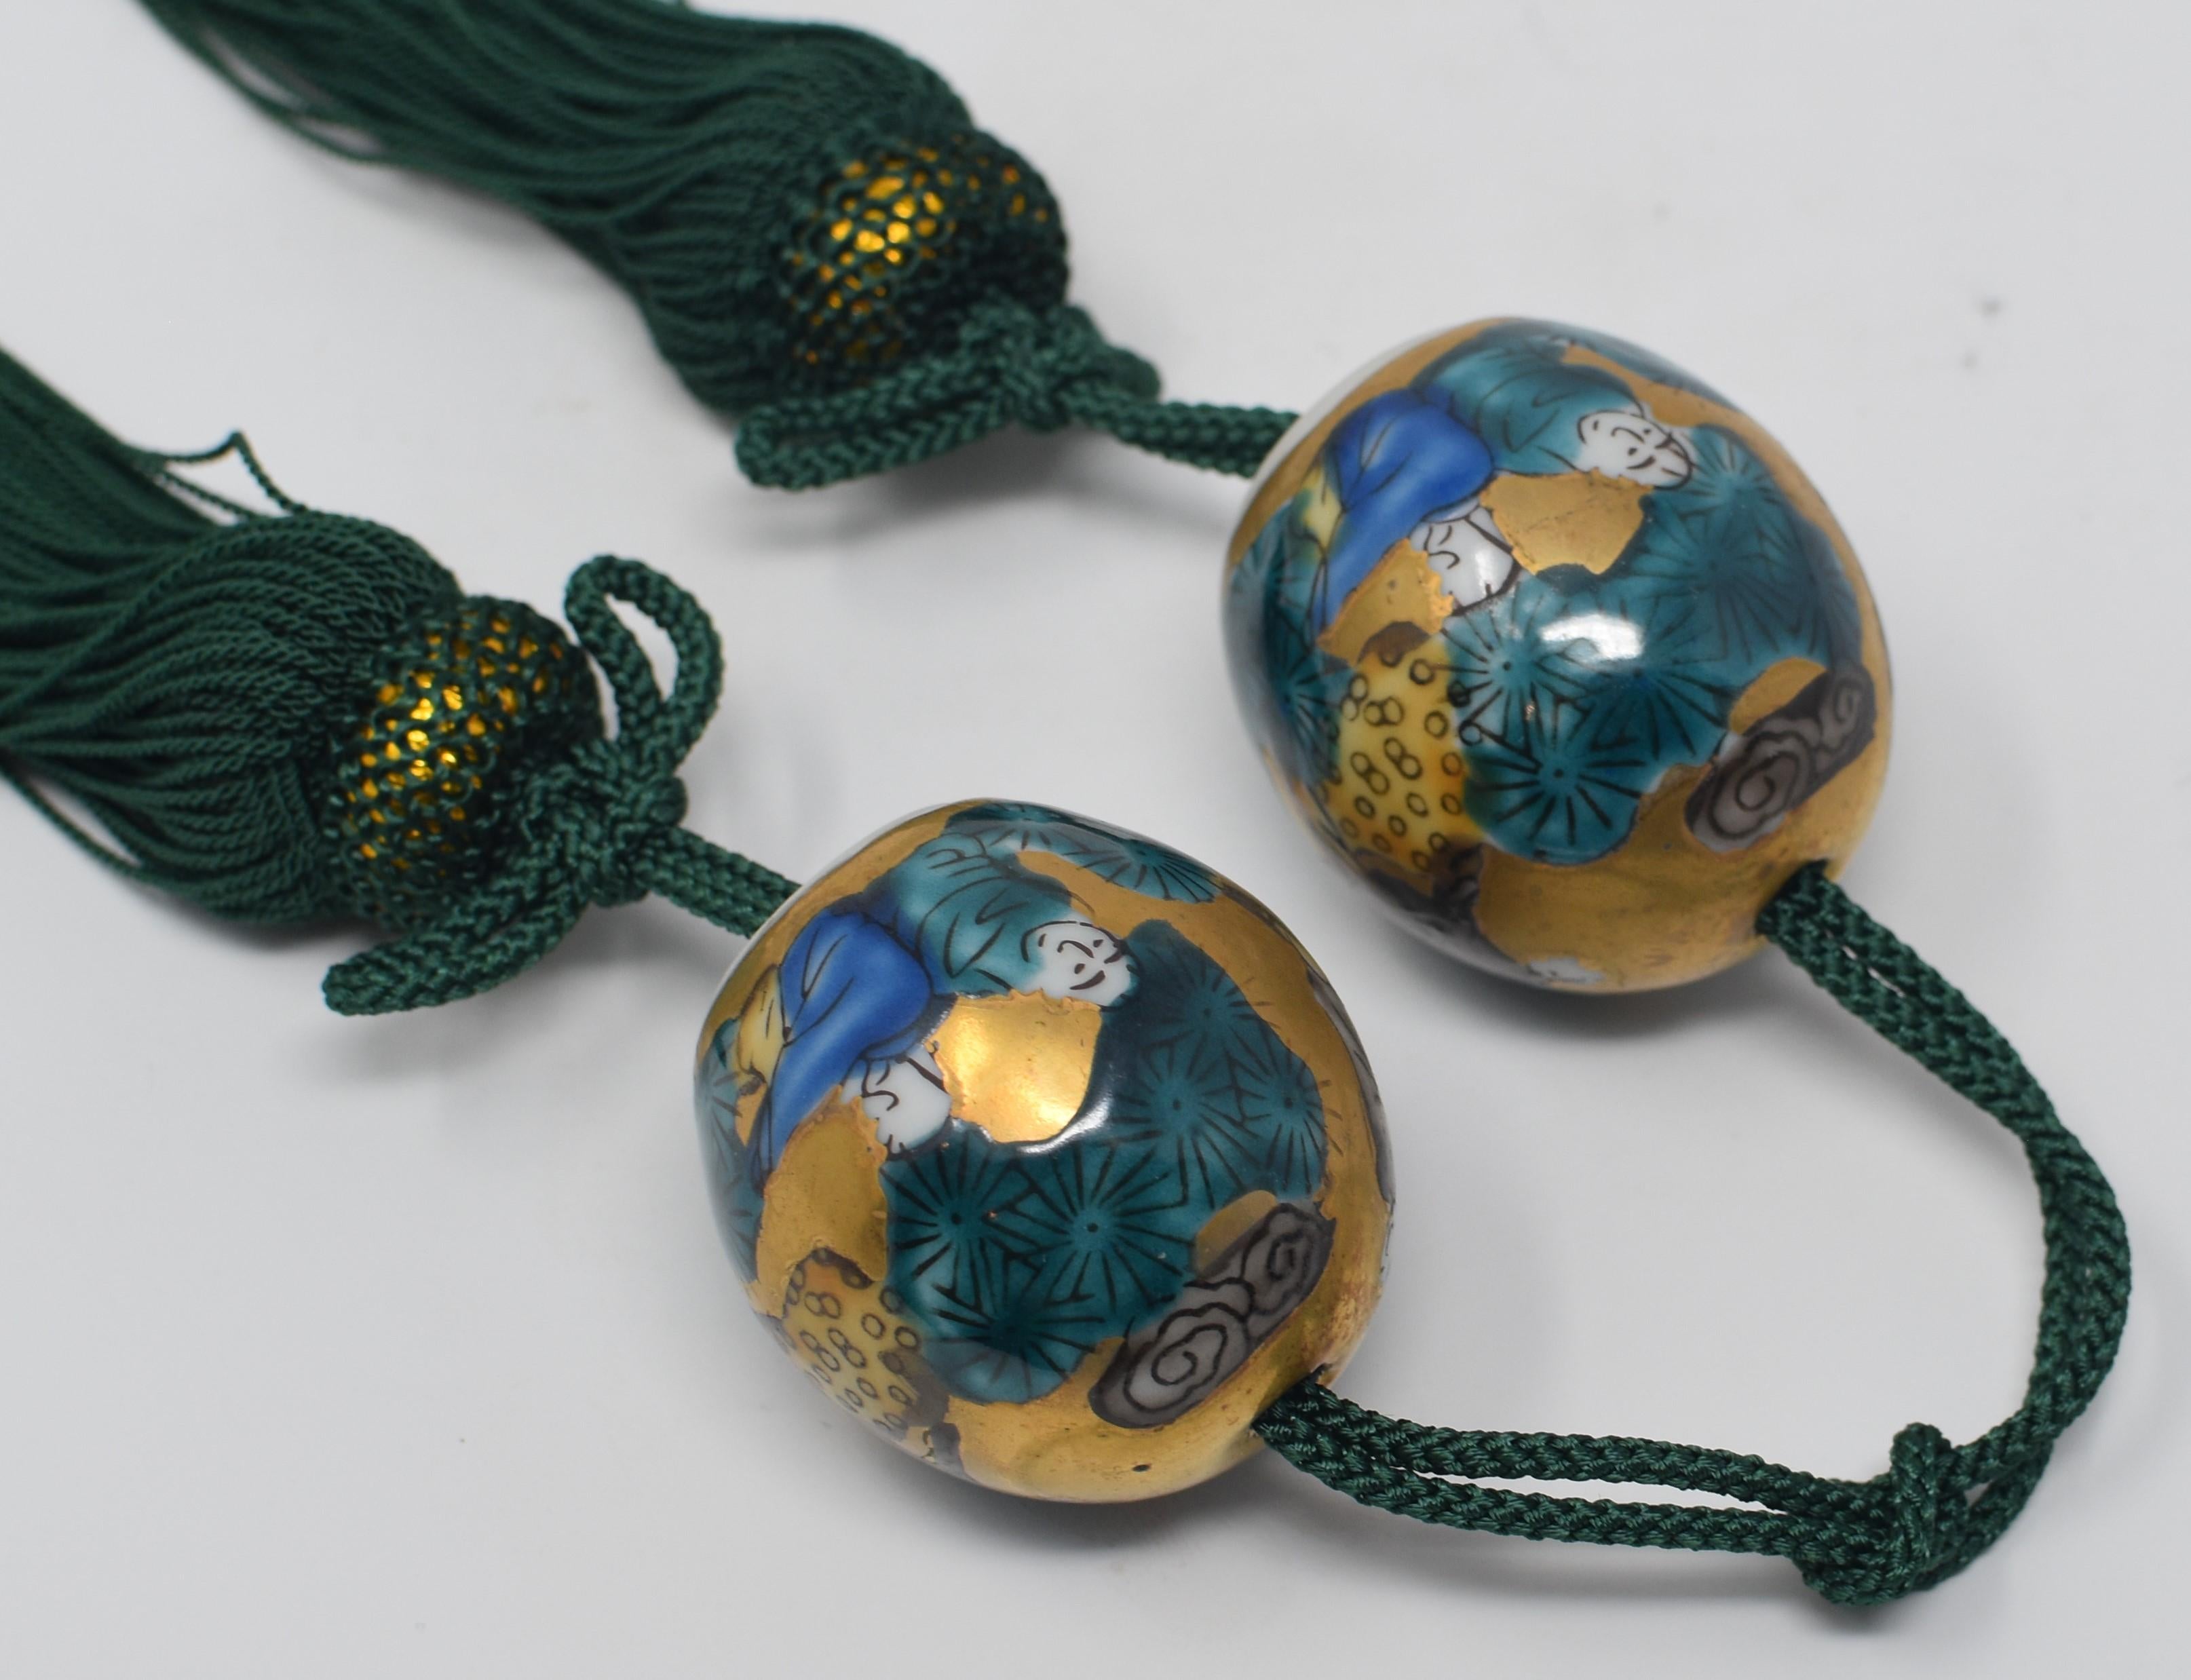 Unique Japanese gilded contemporary pair of porcelain scroll weights (fuchin), extremely intricately hand painted in Mokube pattern, one of Kutani's most recognized and beloved patterns, in green and blue on a beautiful egg shaped body in gold. Each